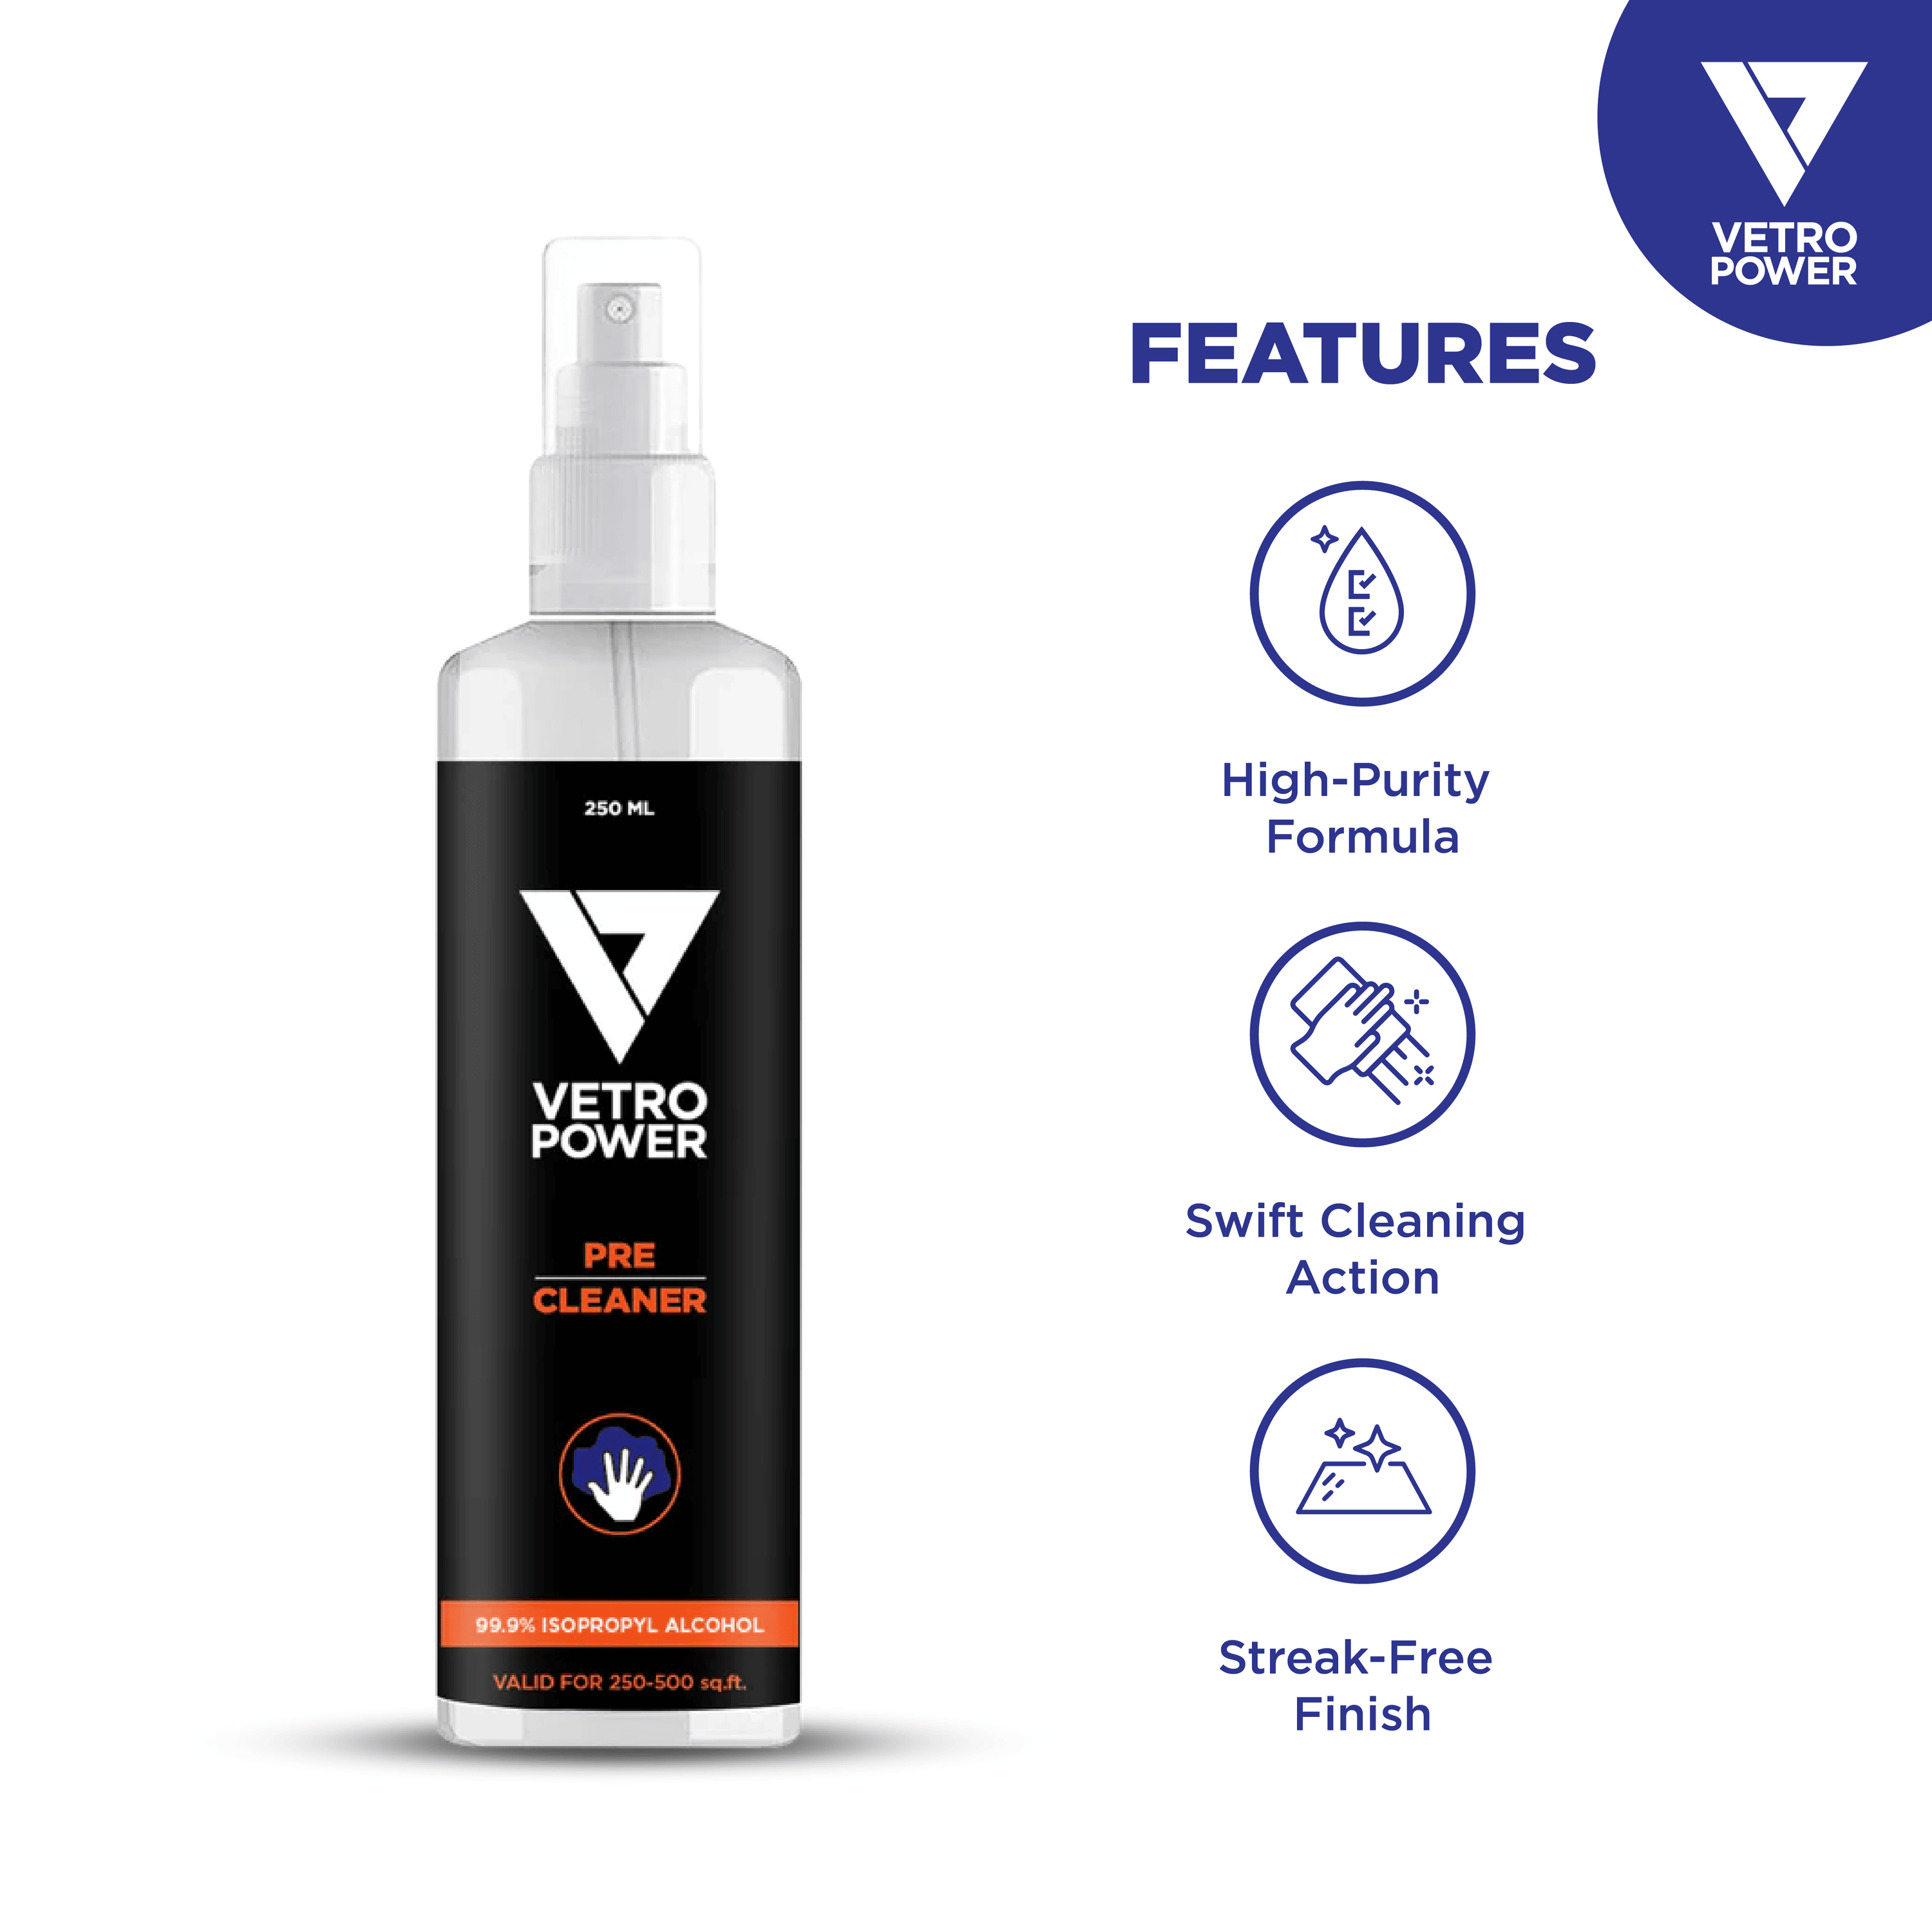 Features of Vetro Power Pre Cleaner